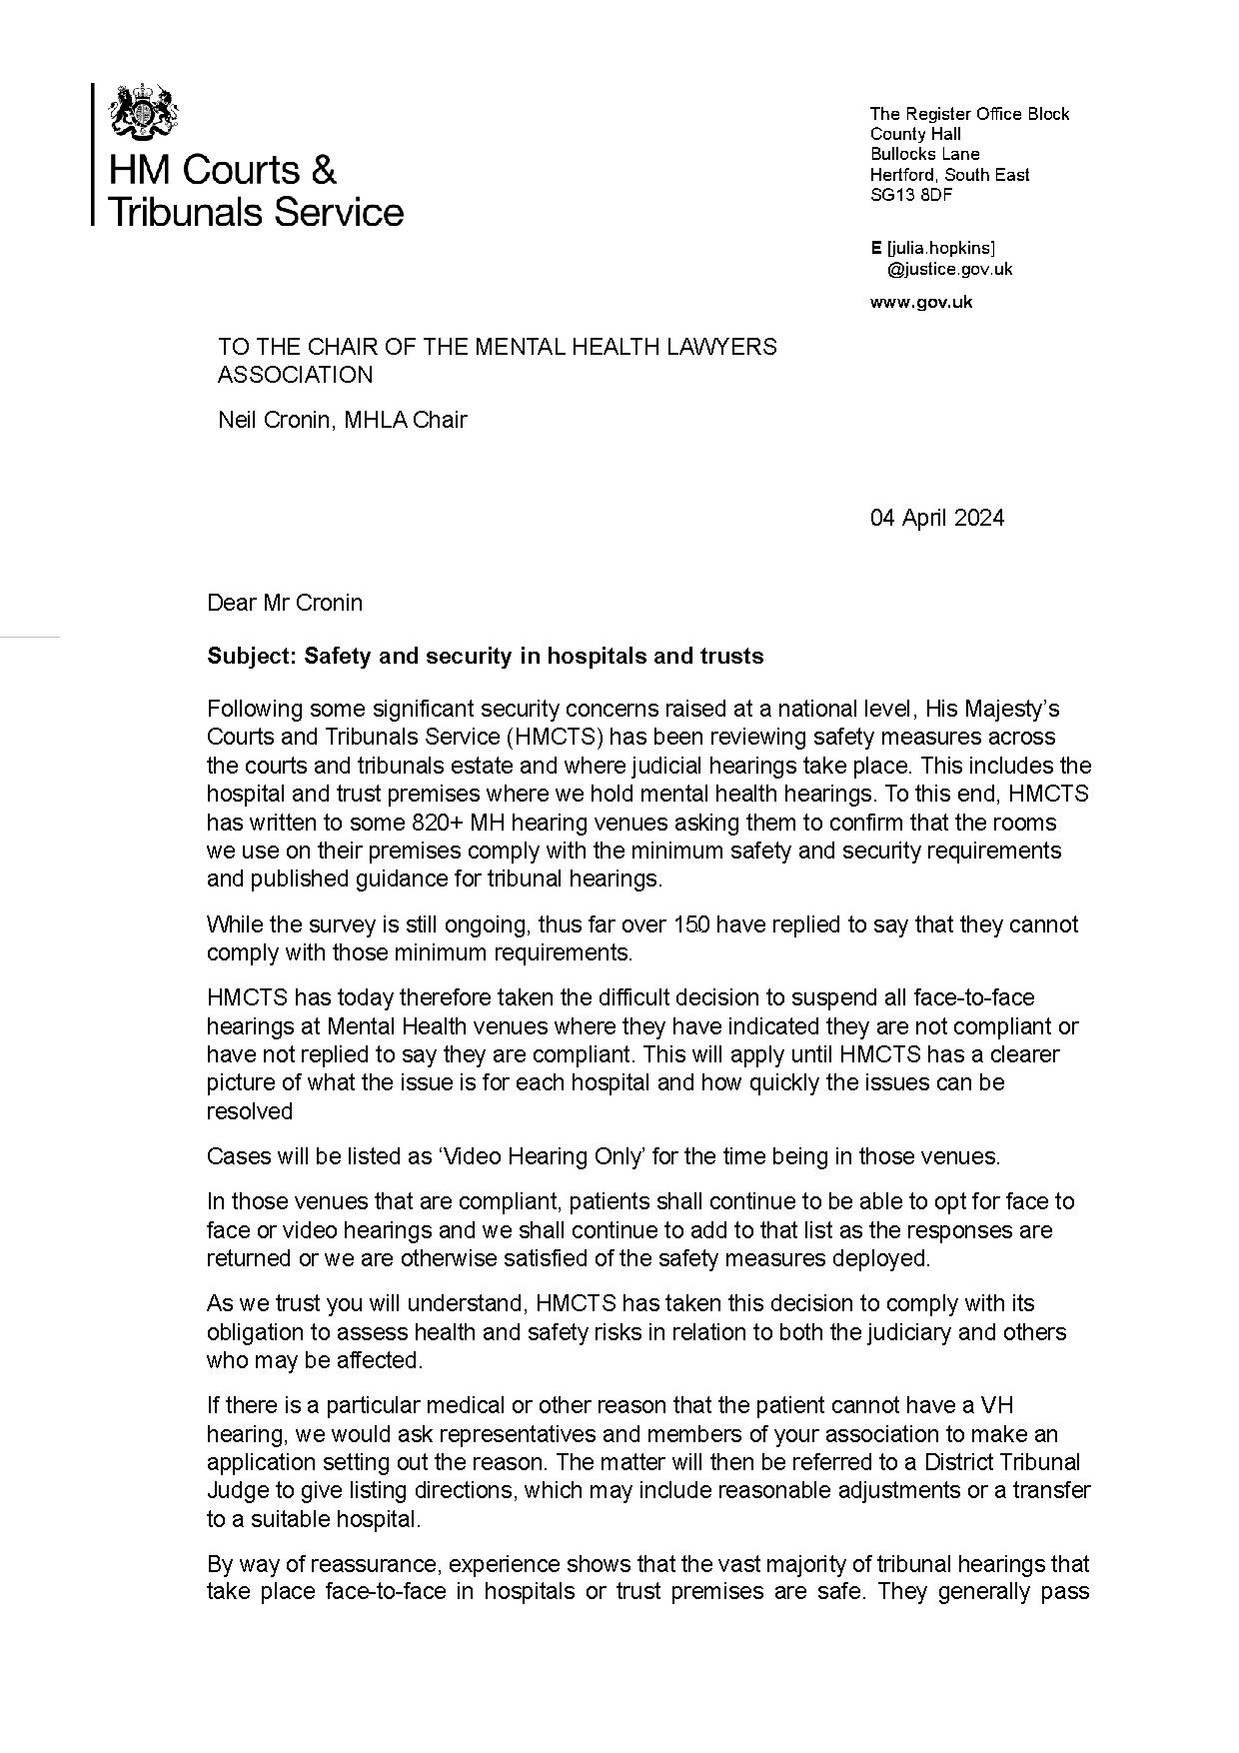 2024-04-04 HMCTS letter to MHLA - Safety and security in hospitals and trusts.pdf